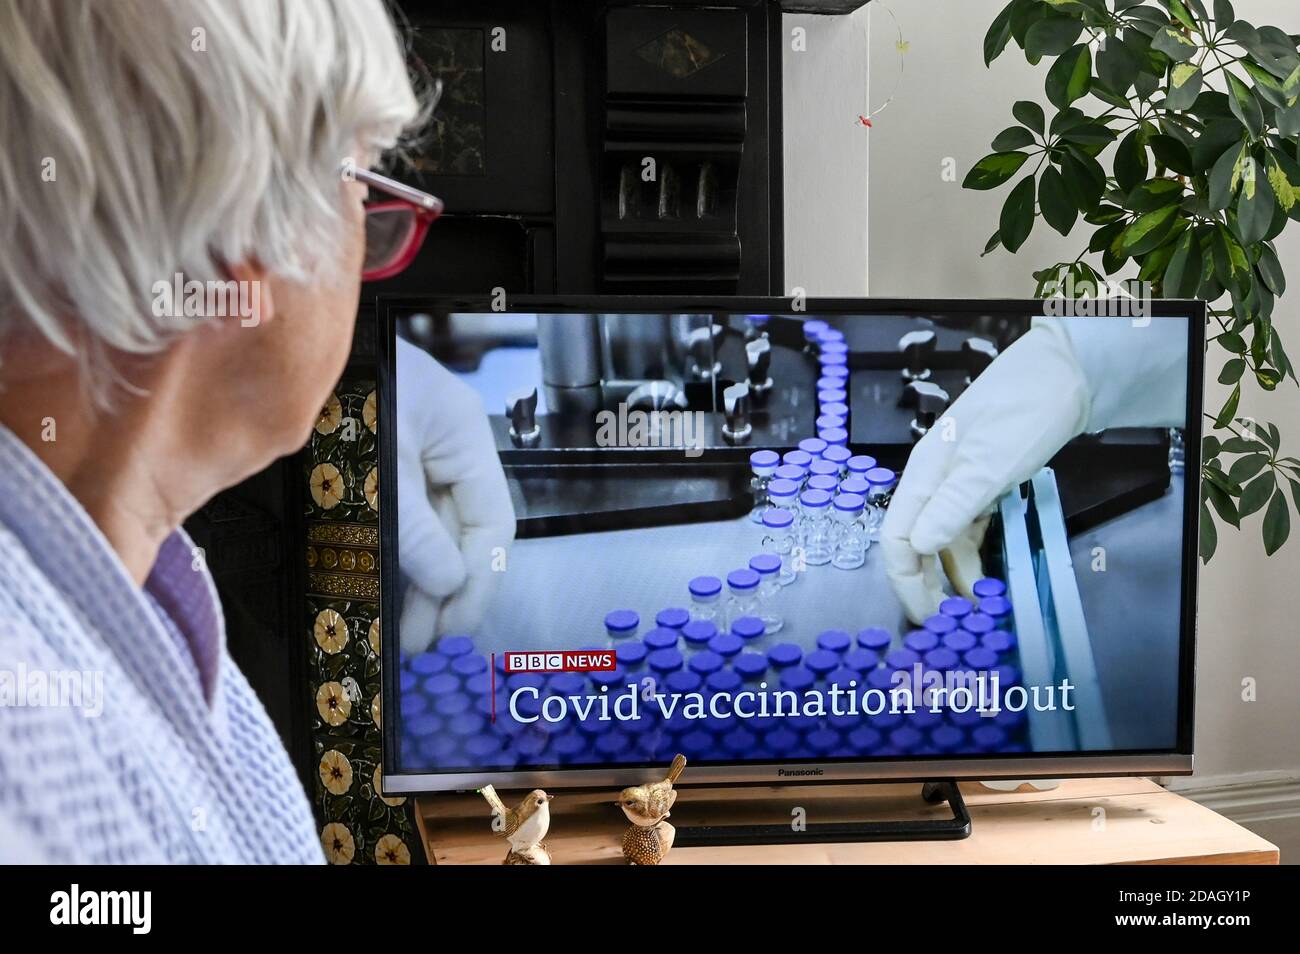 Televised announcement on BBC news of the new Coronavirus vaccine with caption 'Covid vaccination rollout' watched by a viewer. Stock Photo